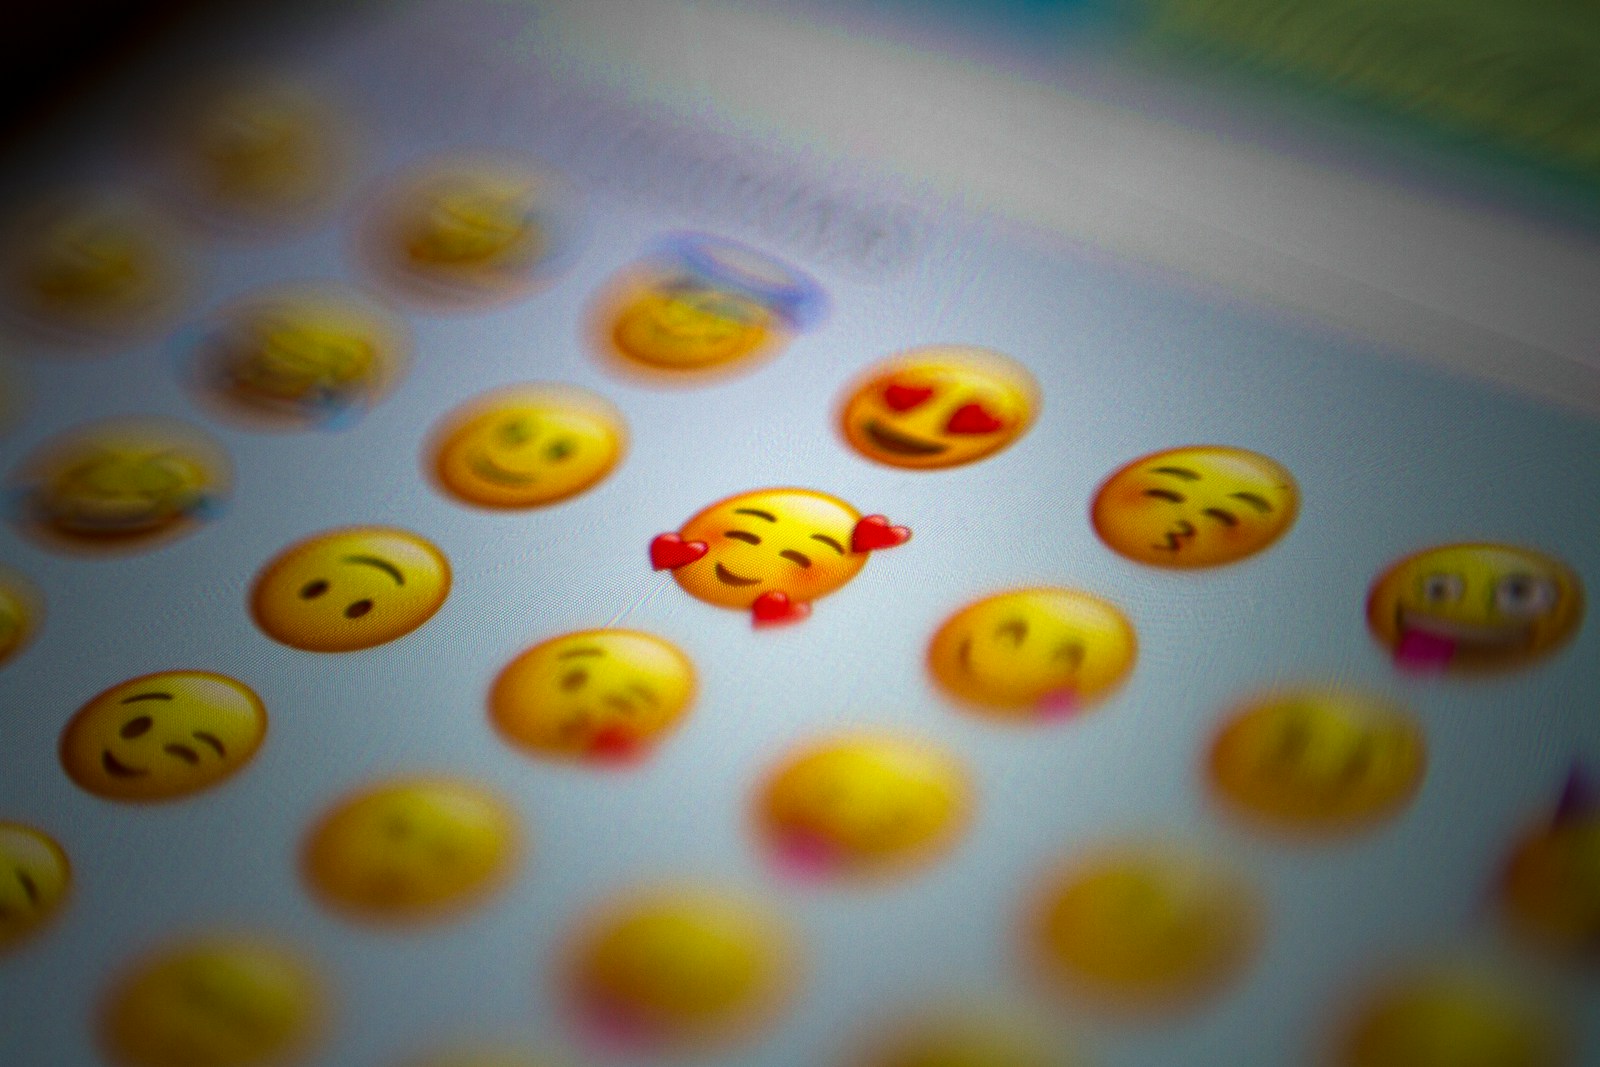 The Emojis People Are Using To Ease Anxiety